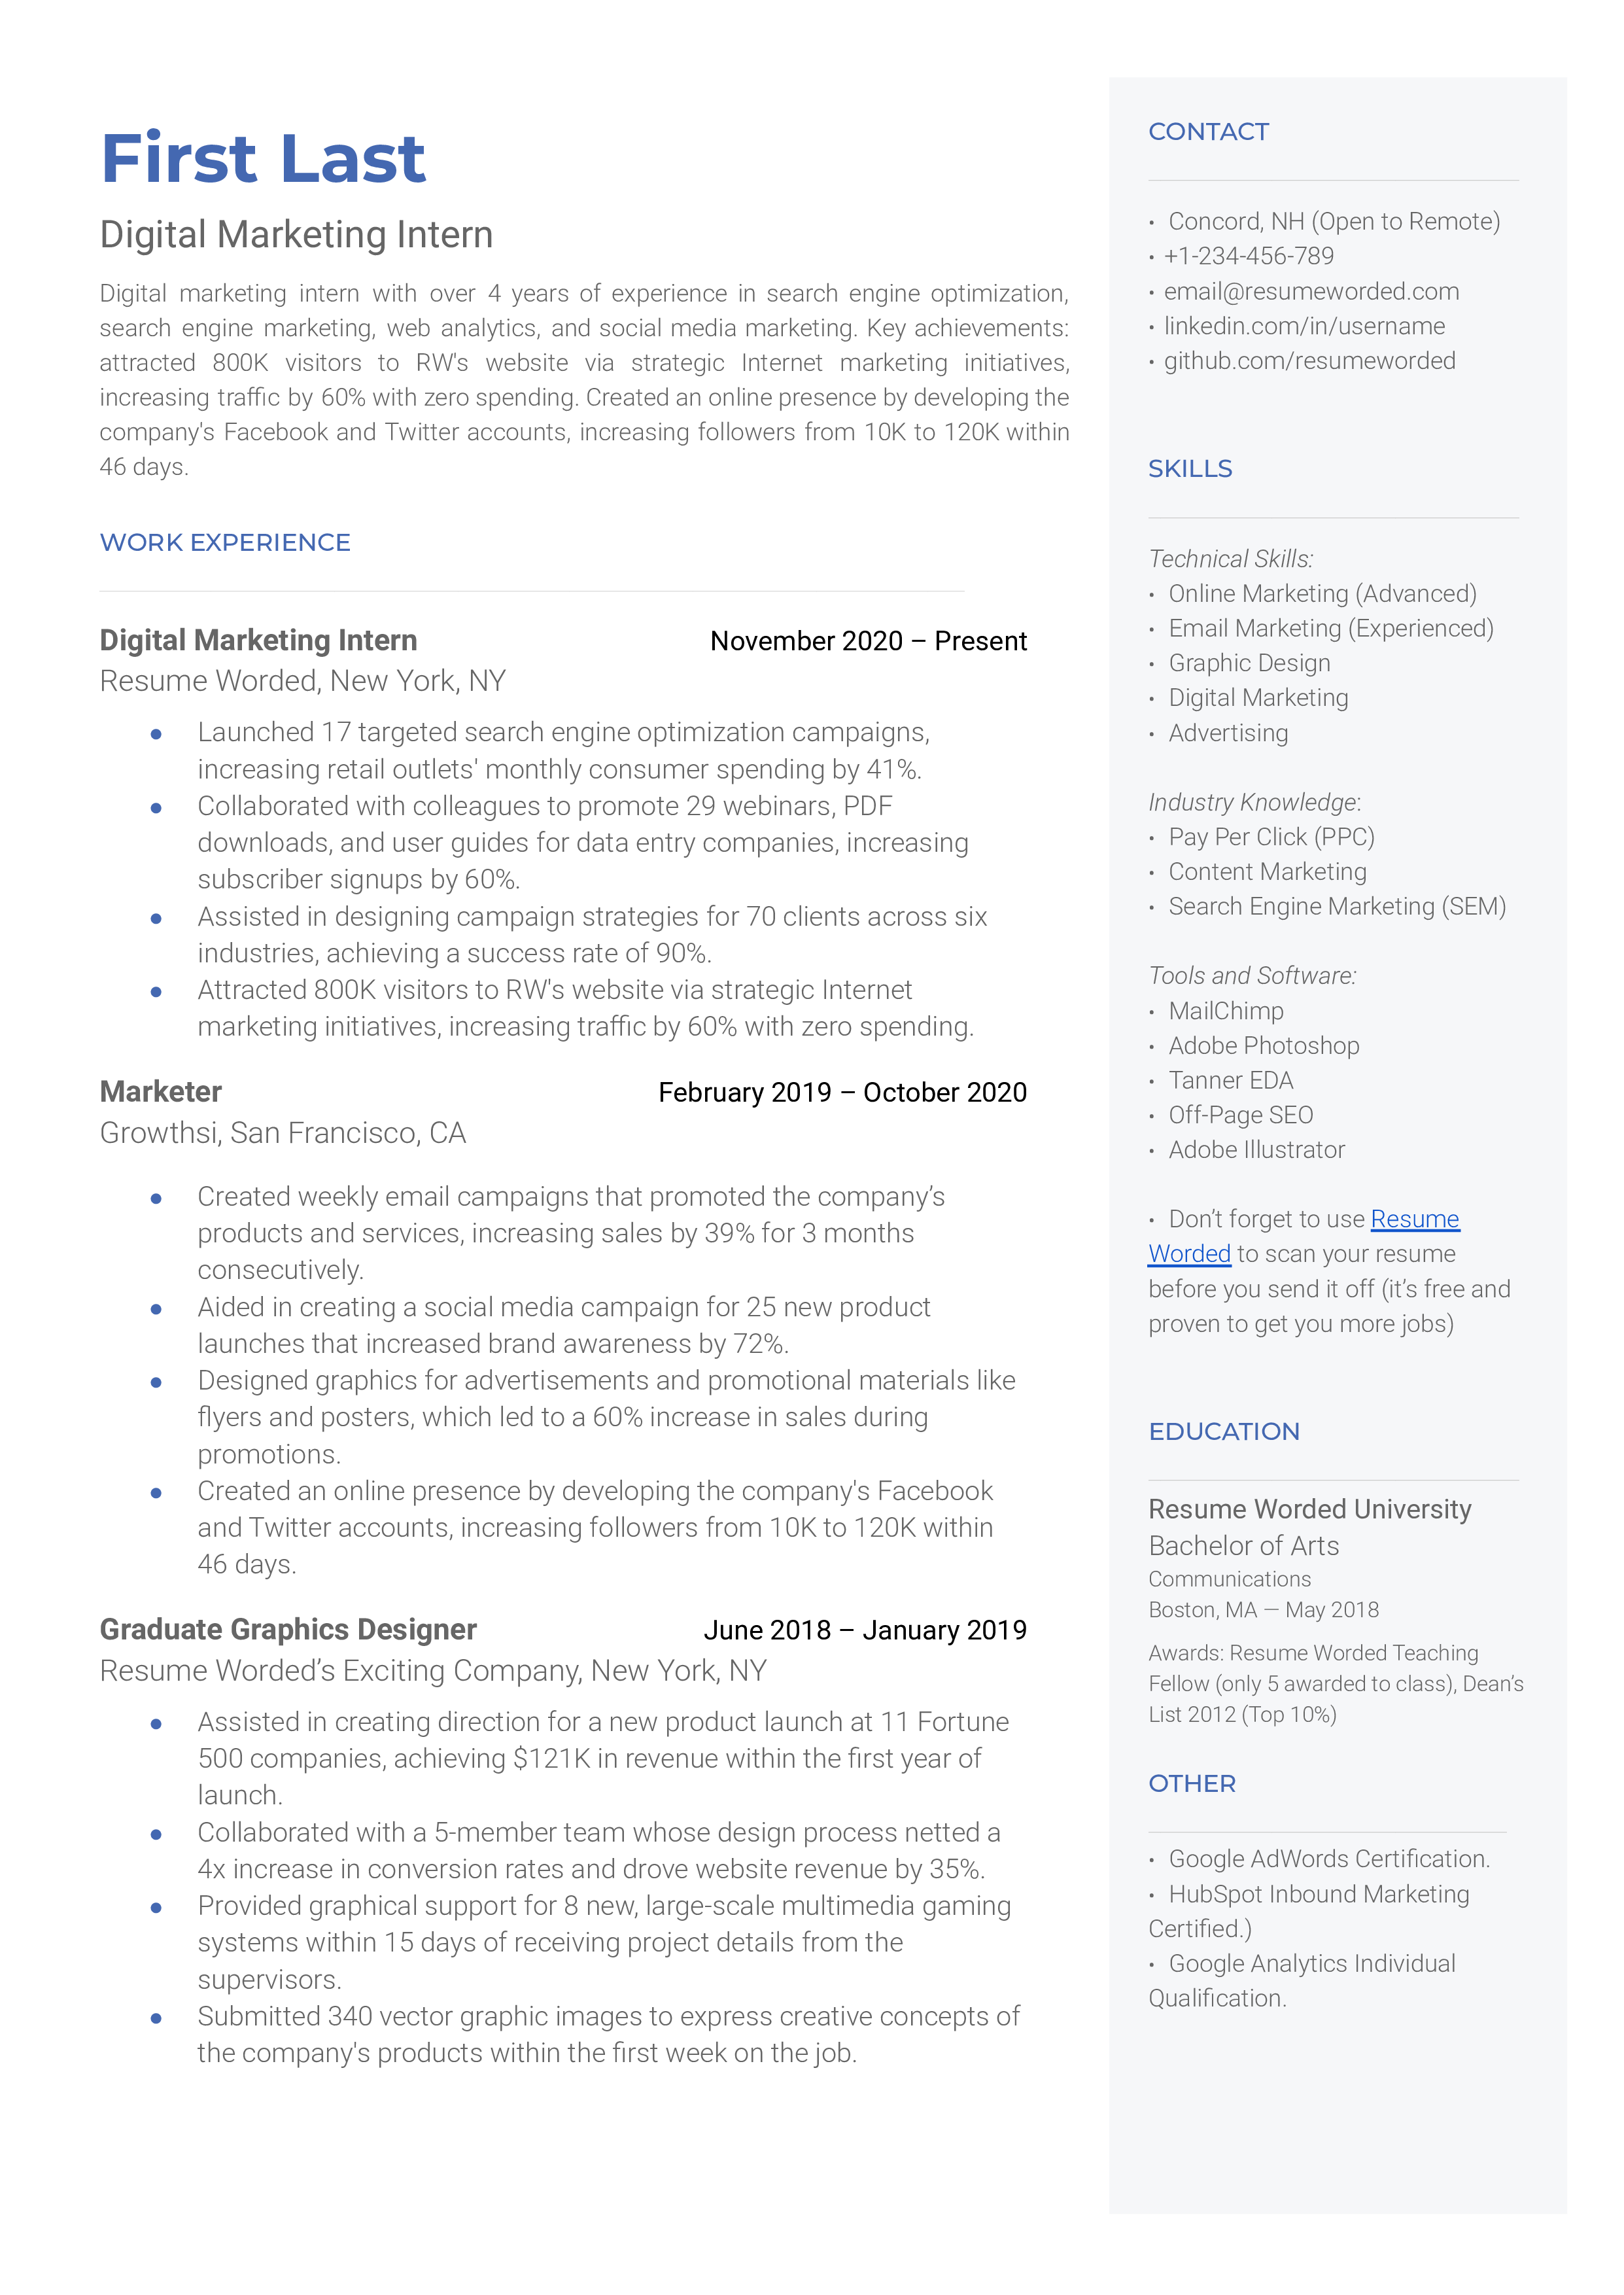 A digital marketing intern resume sample that highlights the applicant’s related experience.